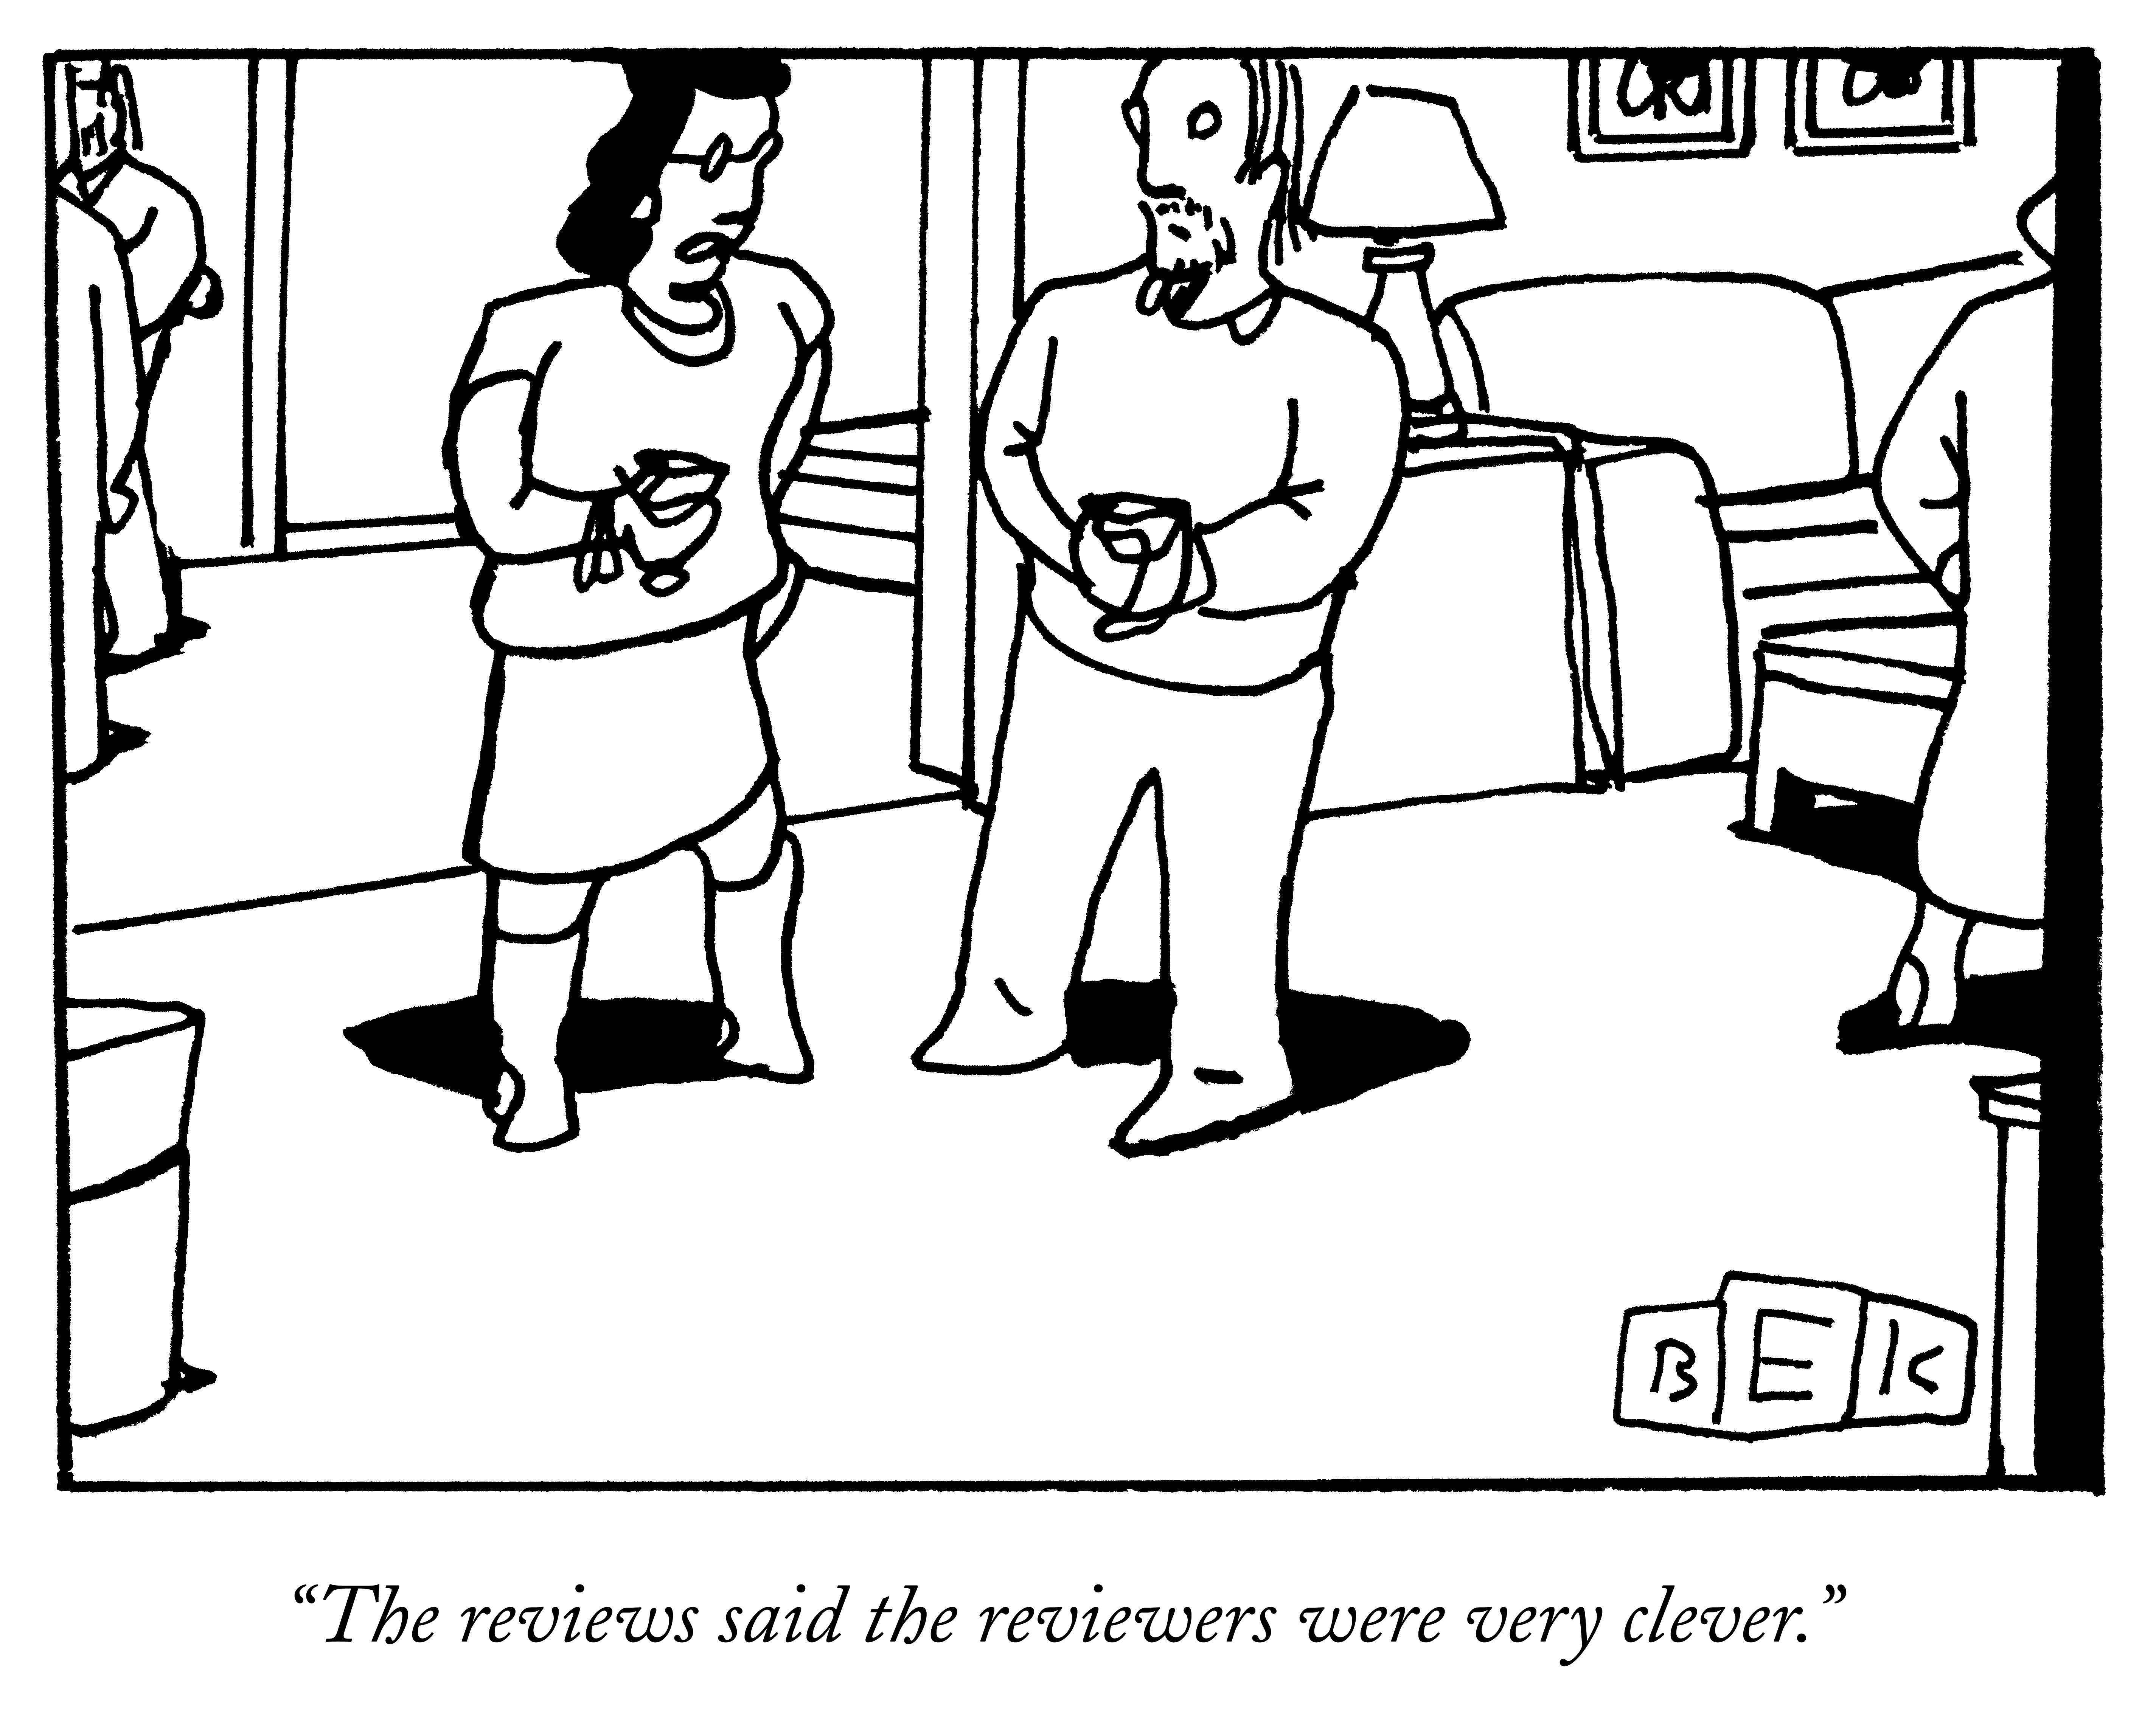 “The reviews said the reviewers were very clever.”